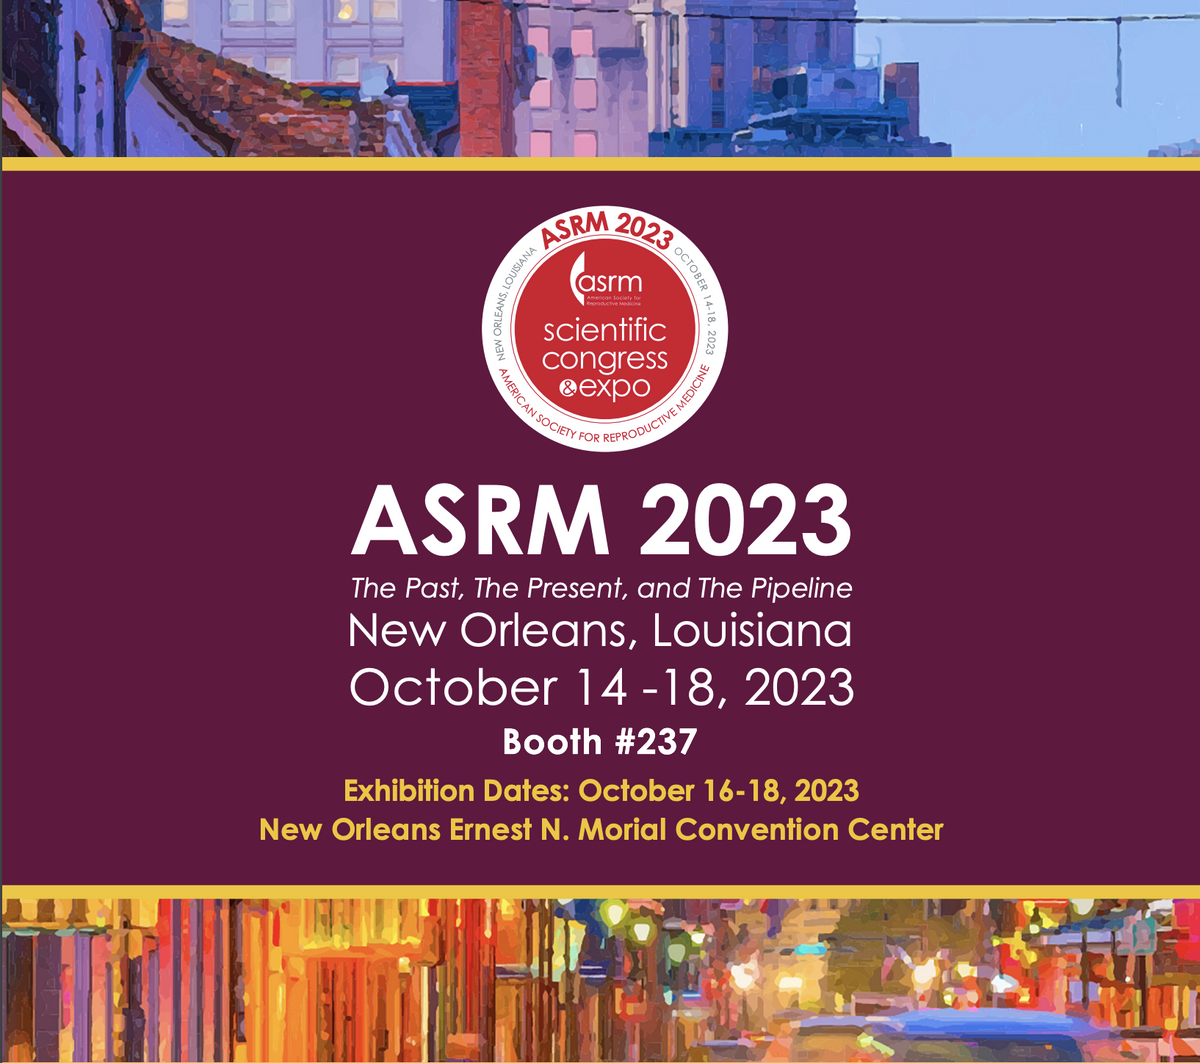 Come and see us in New Orleans ASRM 2023 IVF Store